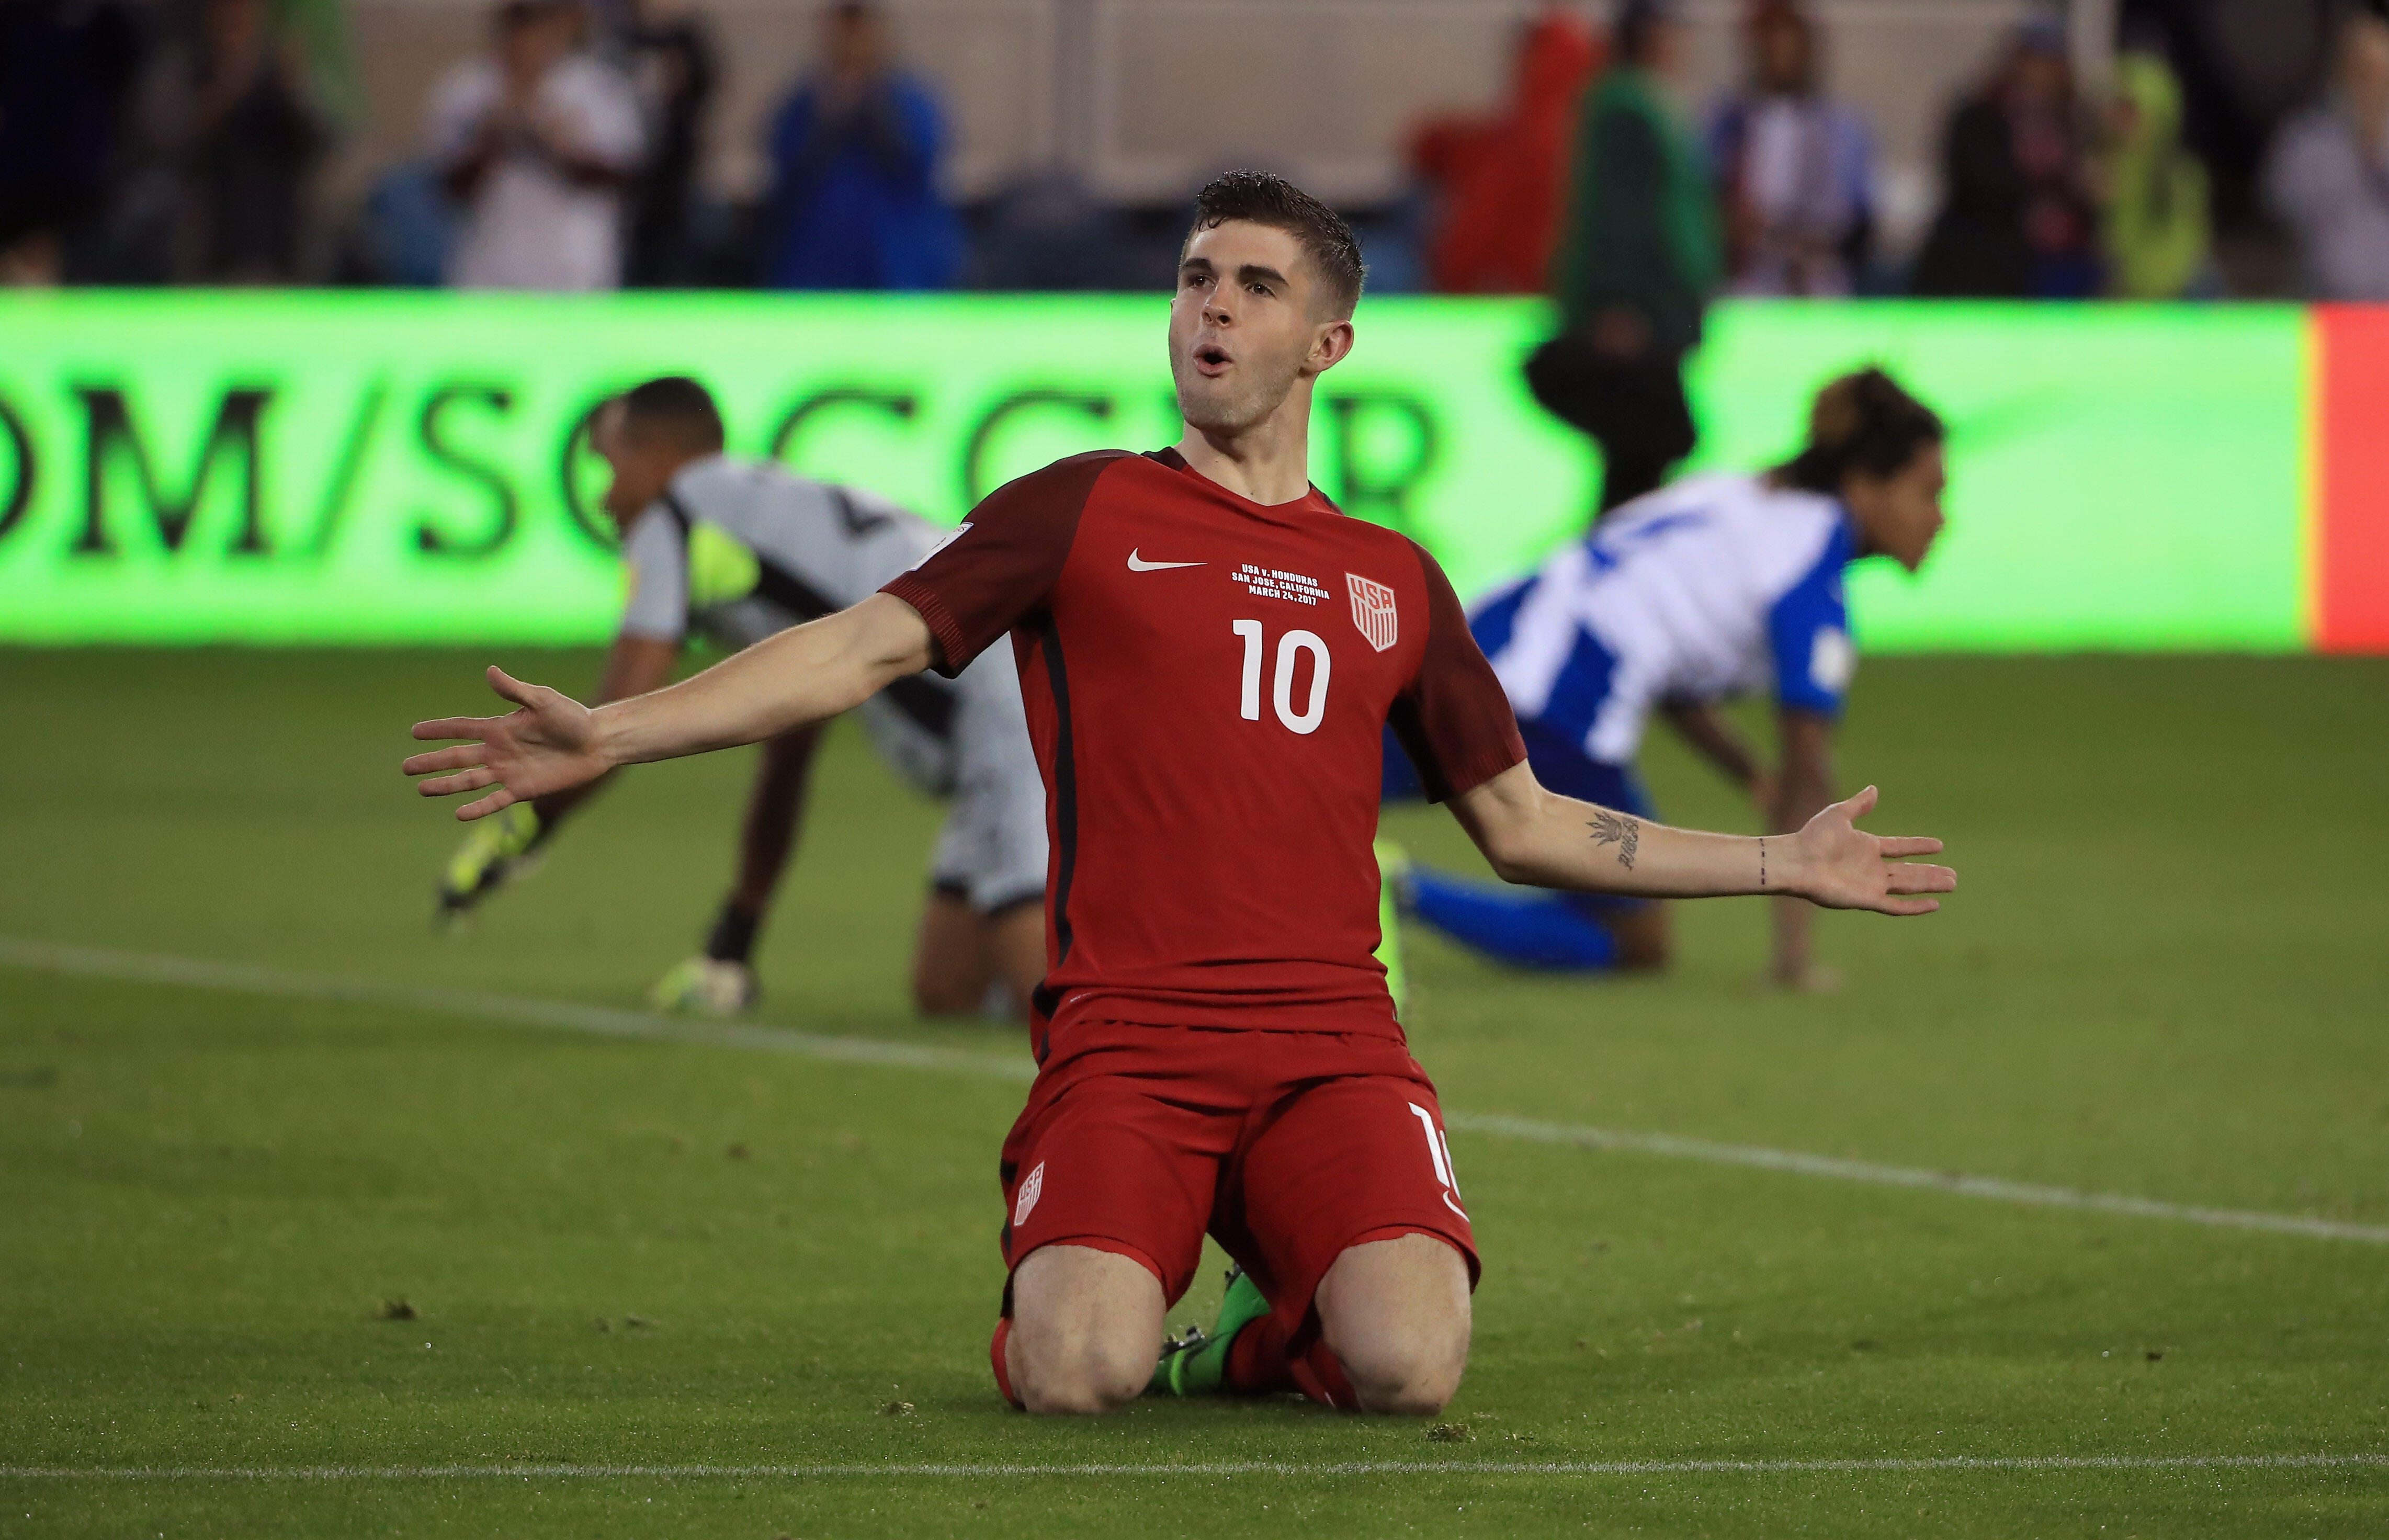 SAN JOSE, CA - MARCH 24:  Christian Pulisic #10 of the United States celebrates after scoring a goal against Honduras during their FIFA 2018 World Cup Qualifier at Avaya Stadium on March 24, 2017 in San Jose, California.  (Photo by Ezra Shaw/Getty Images)